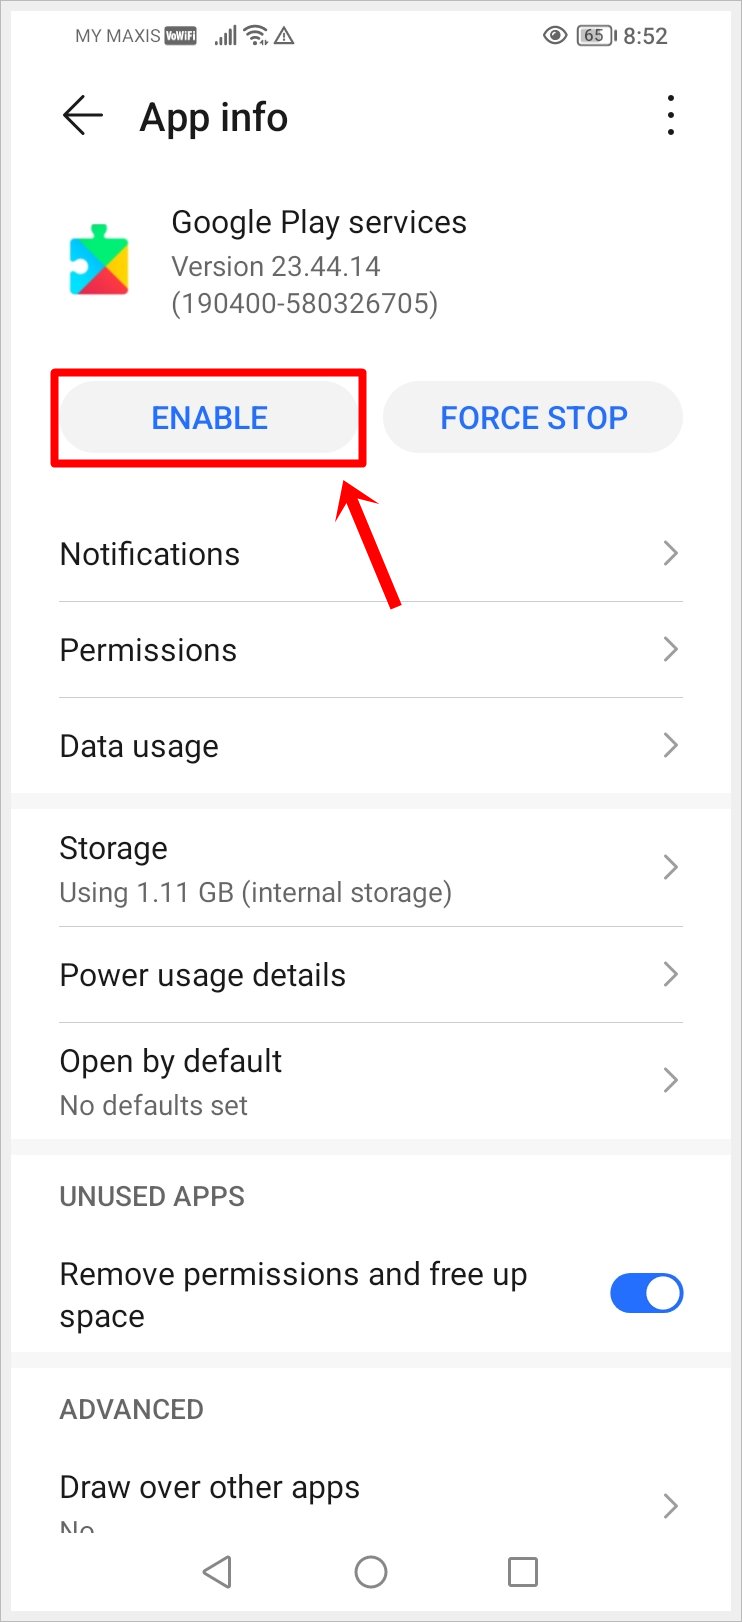 How to Fix "Google Play Services Keeps Stopping" Error: This image shows the "Google Play Services" App info page with the "ENABLE" button highlighted.